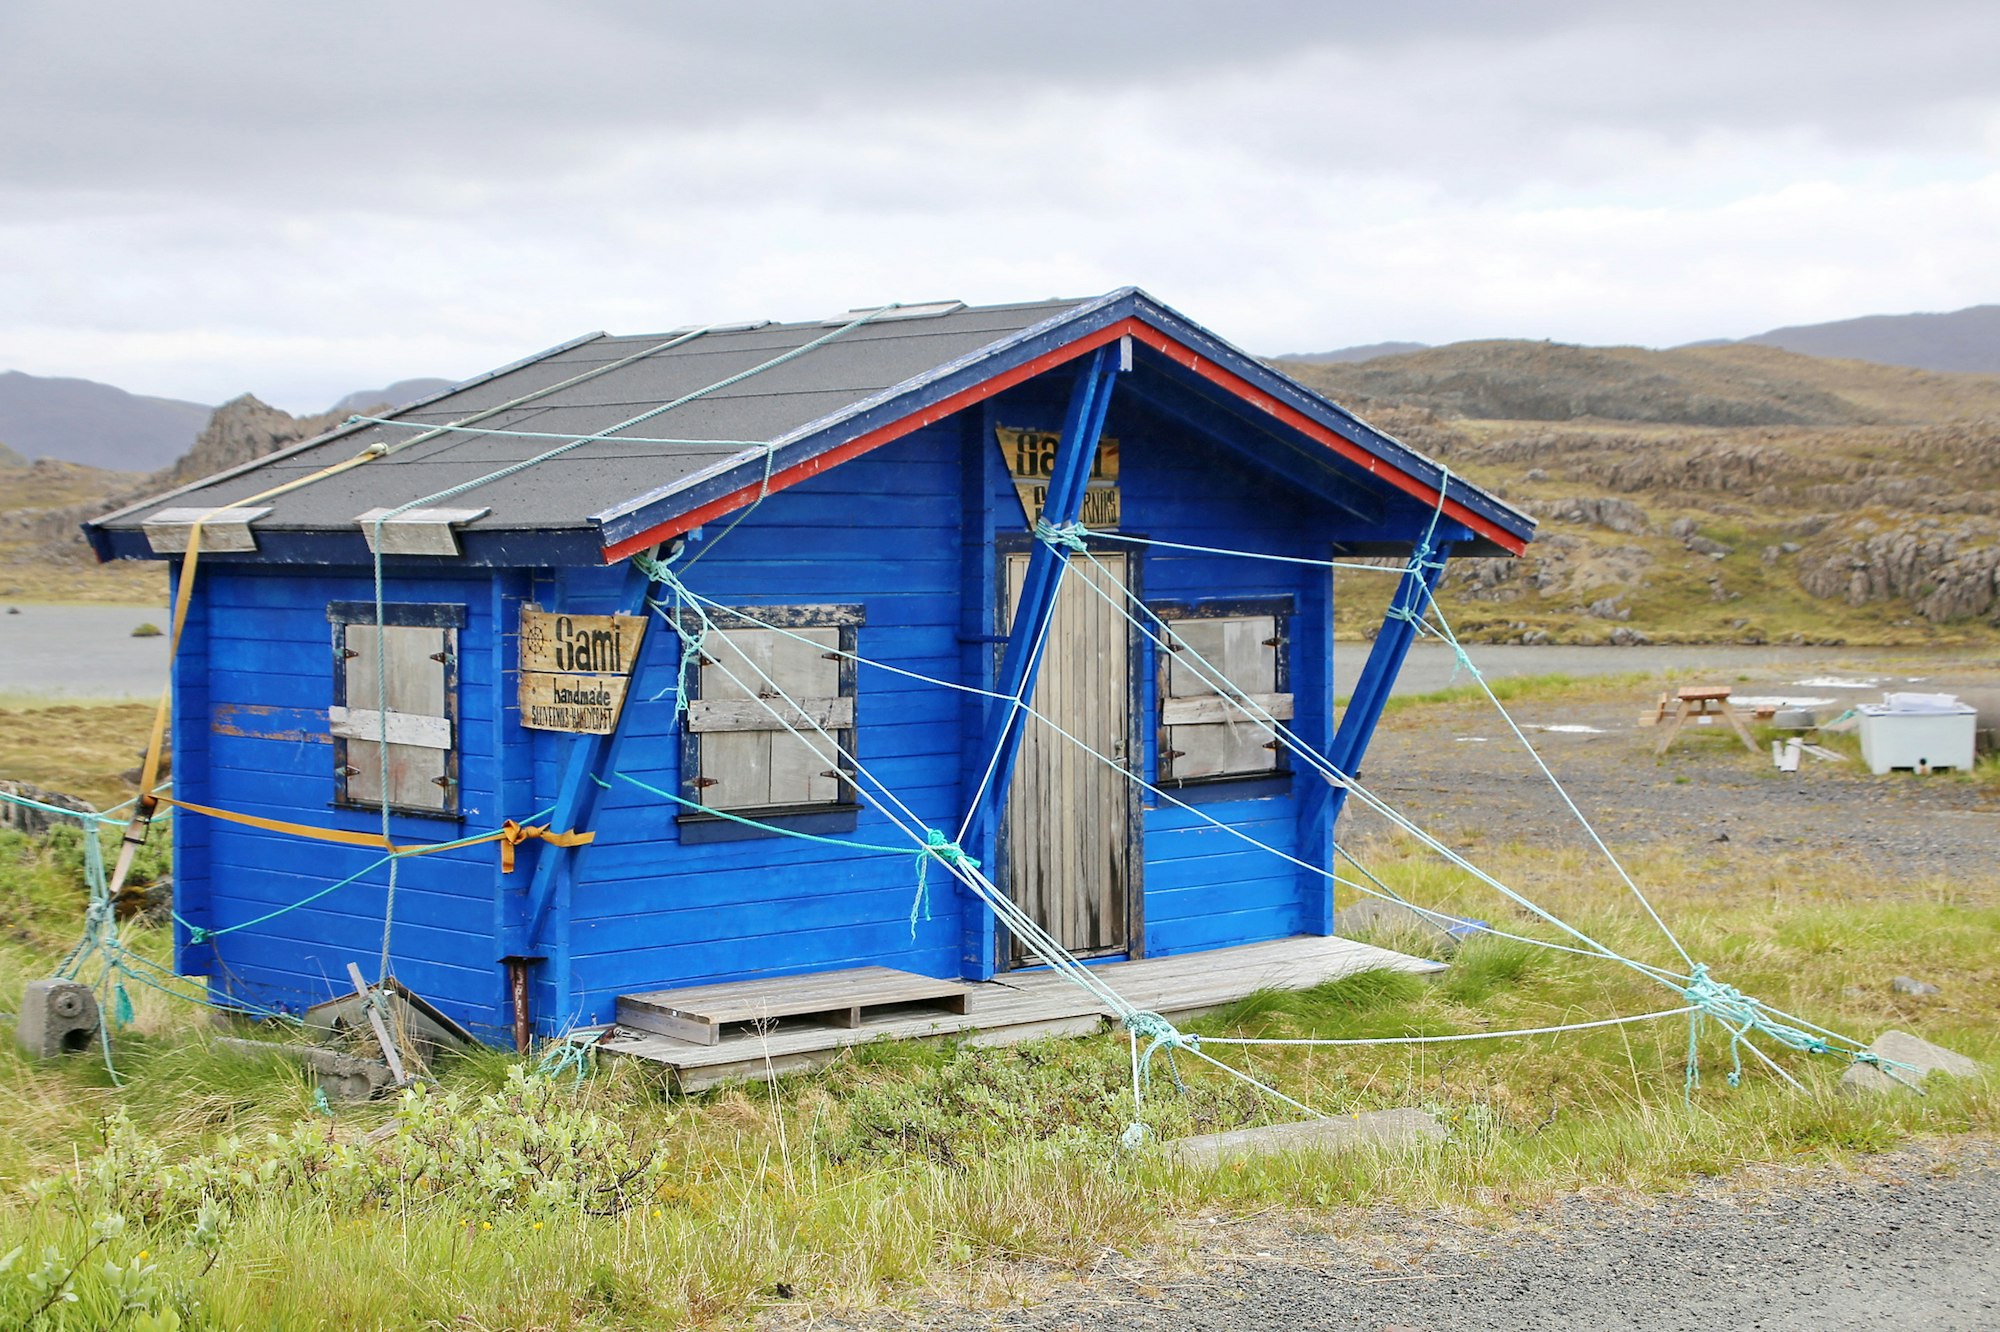 How to describe this little hut which seems to be hold together by ropes? Seen close to North Cape (Norway).

Minimum viable product?